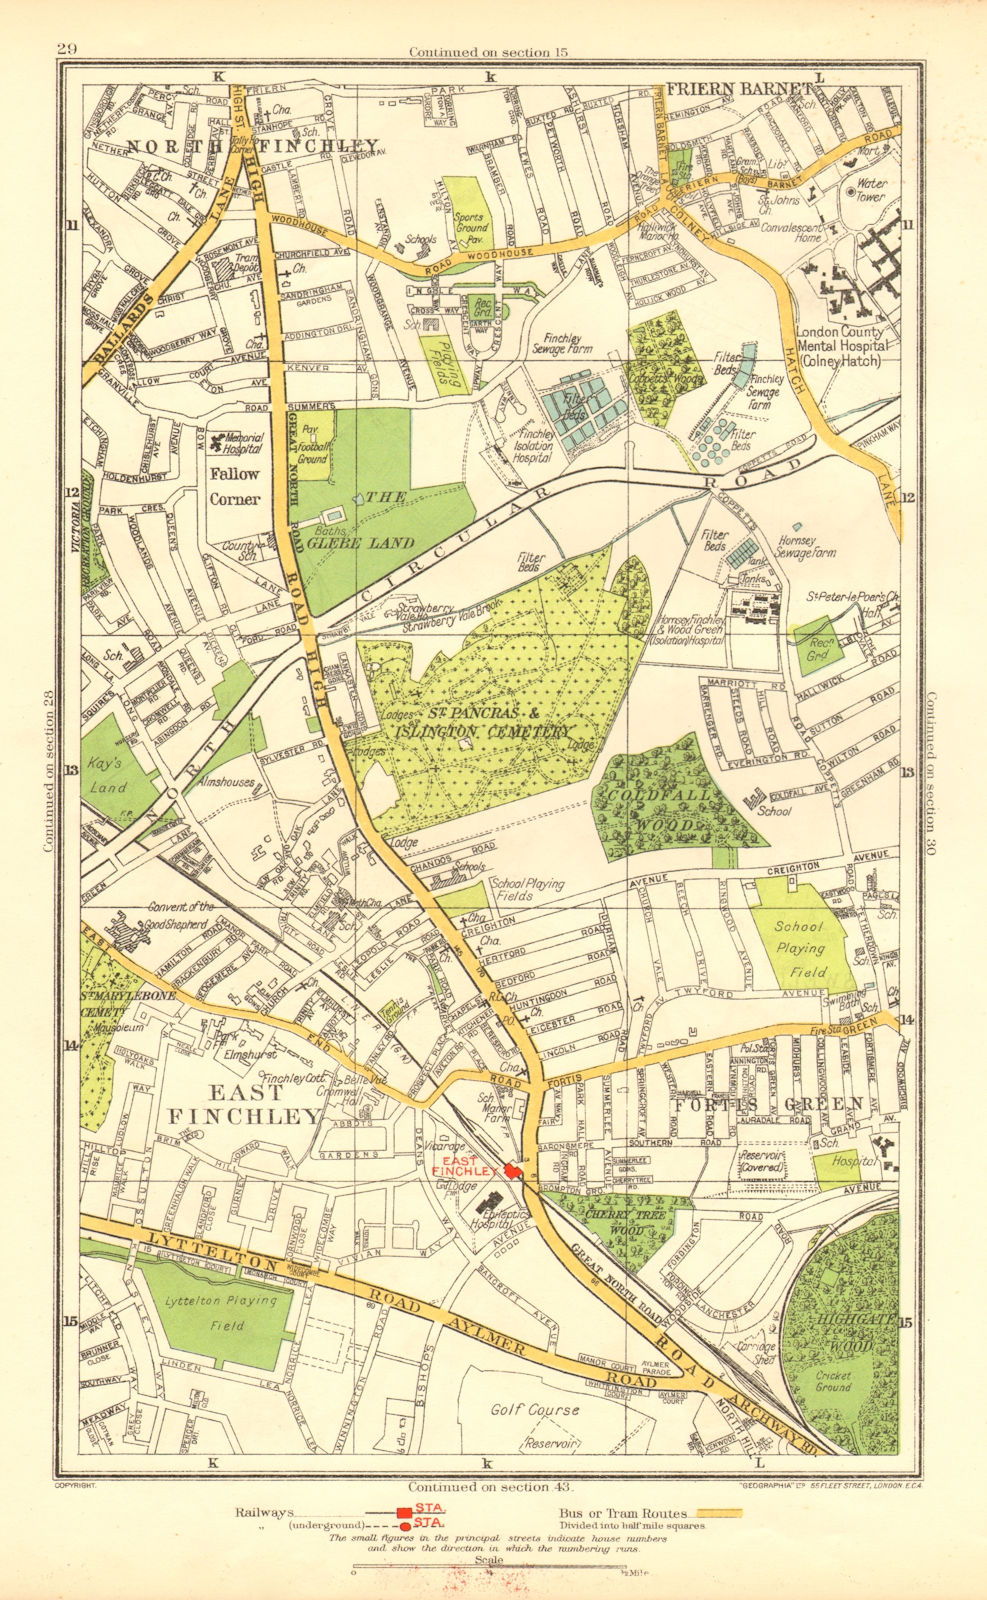 FINCHLEY. Fortis Green Friern Barnet Muswell Hill Fallow Corner 1937 old map